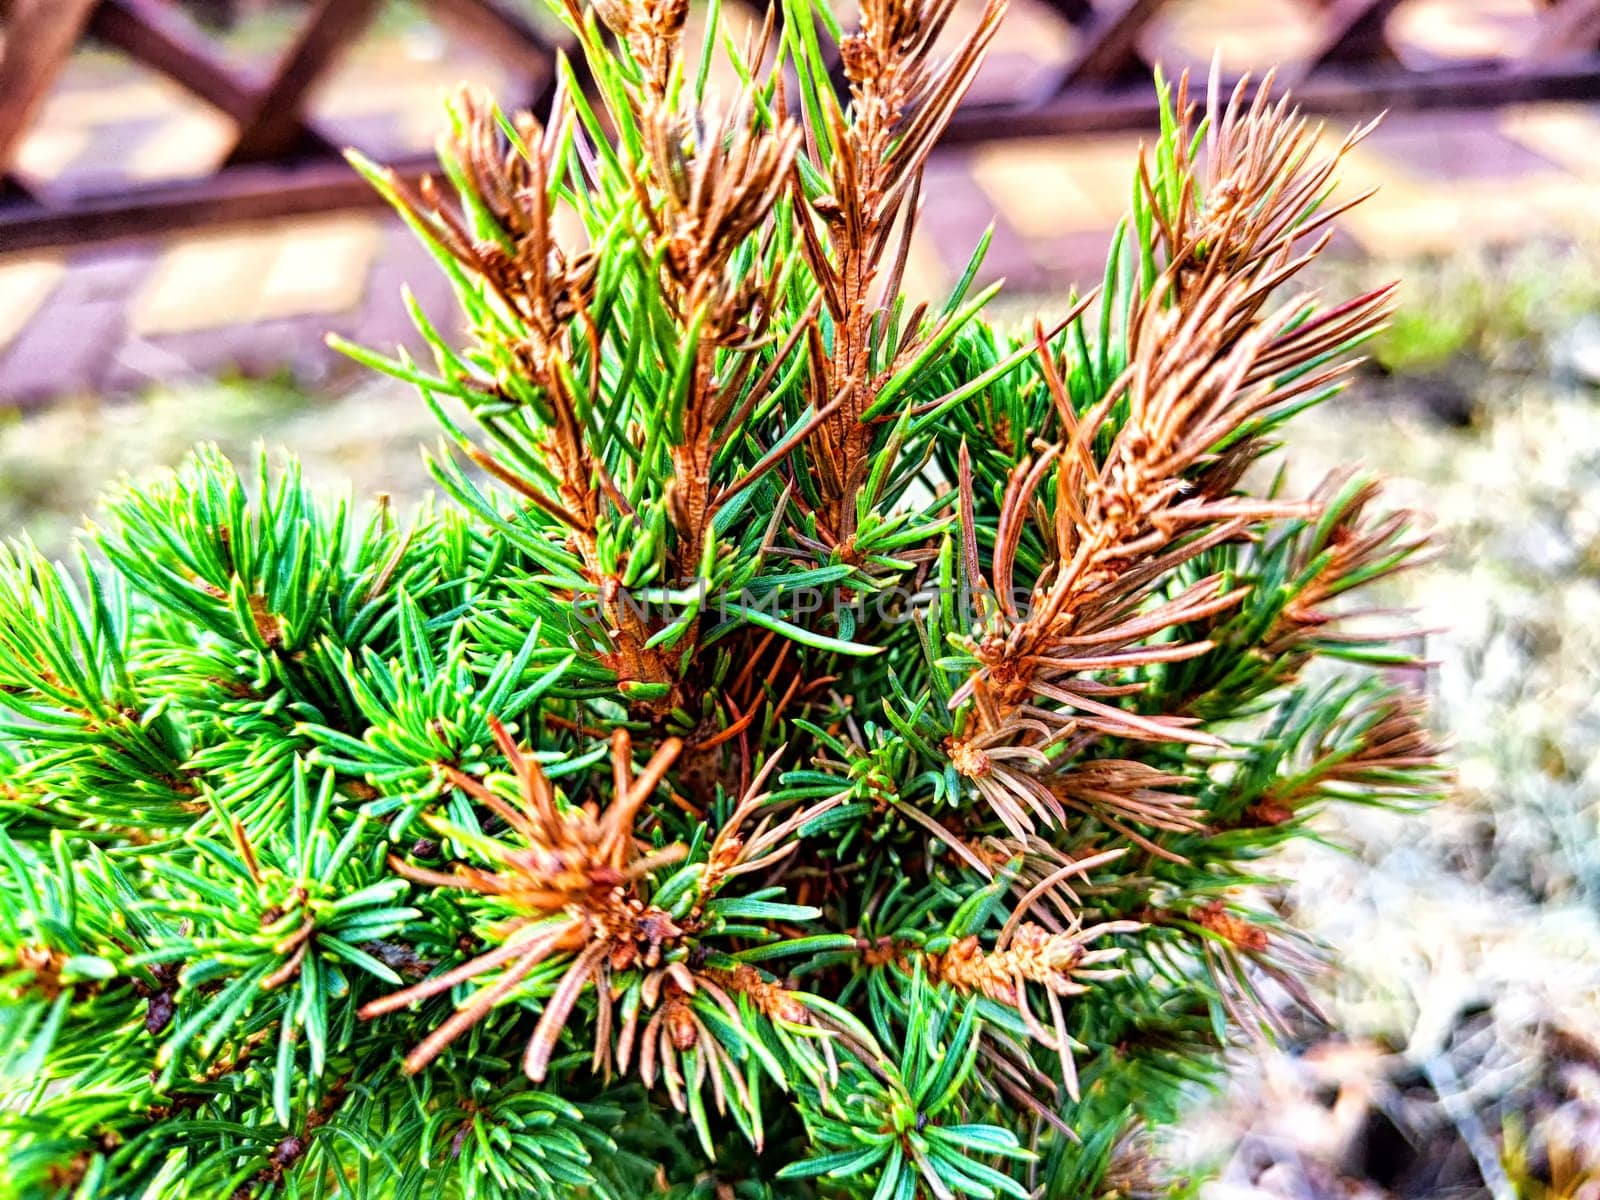 Sick Spruce Exhibiting Dry Needles Close-Up. Close view of spruce tree showing symptoms of ill health with dry, browning needles